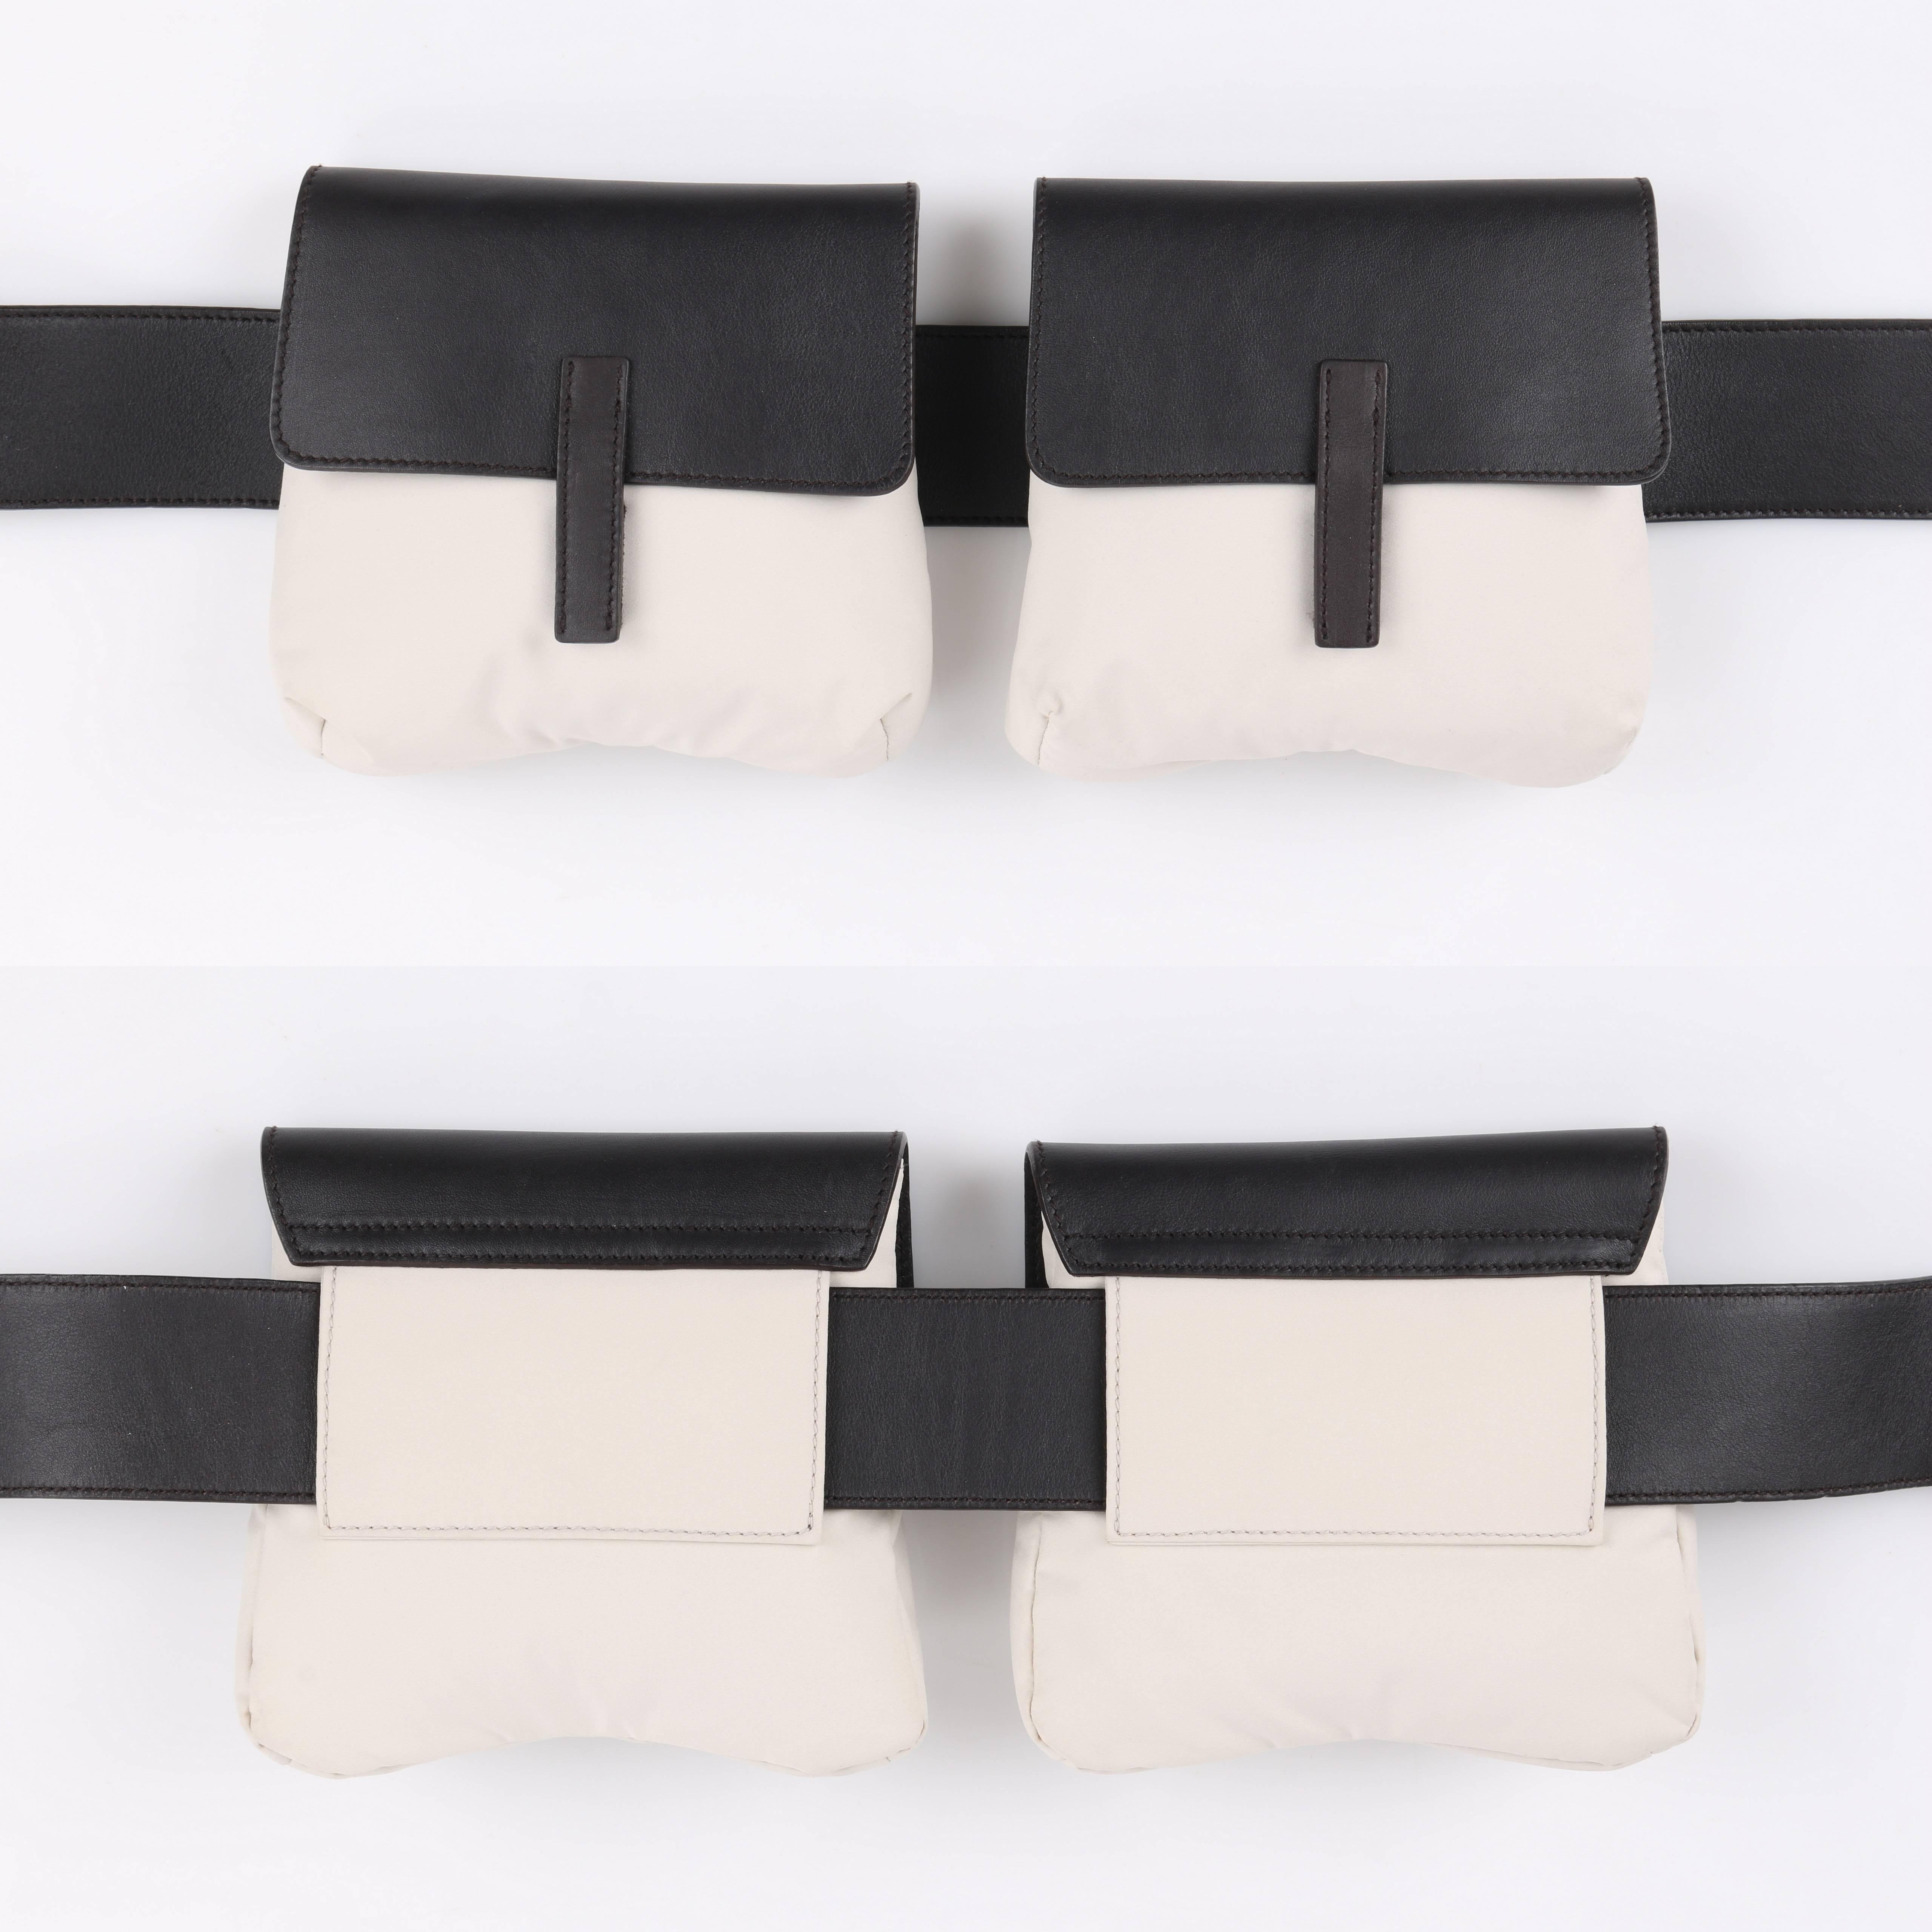 Prada Sport dark brown leather and beige nylon waist belt bag. Two pouches with beige nylon body. Brown leather flap top with velcro closure. Fully lined with brown nylon. Center back tab for removal from belt. Brown leather adjustable belt with